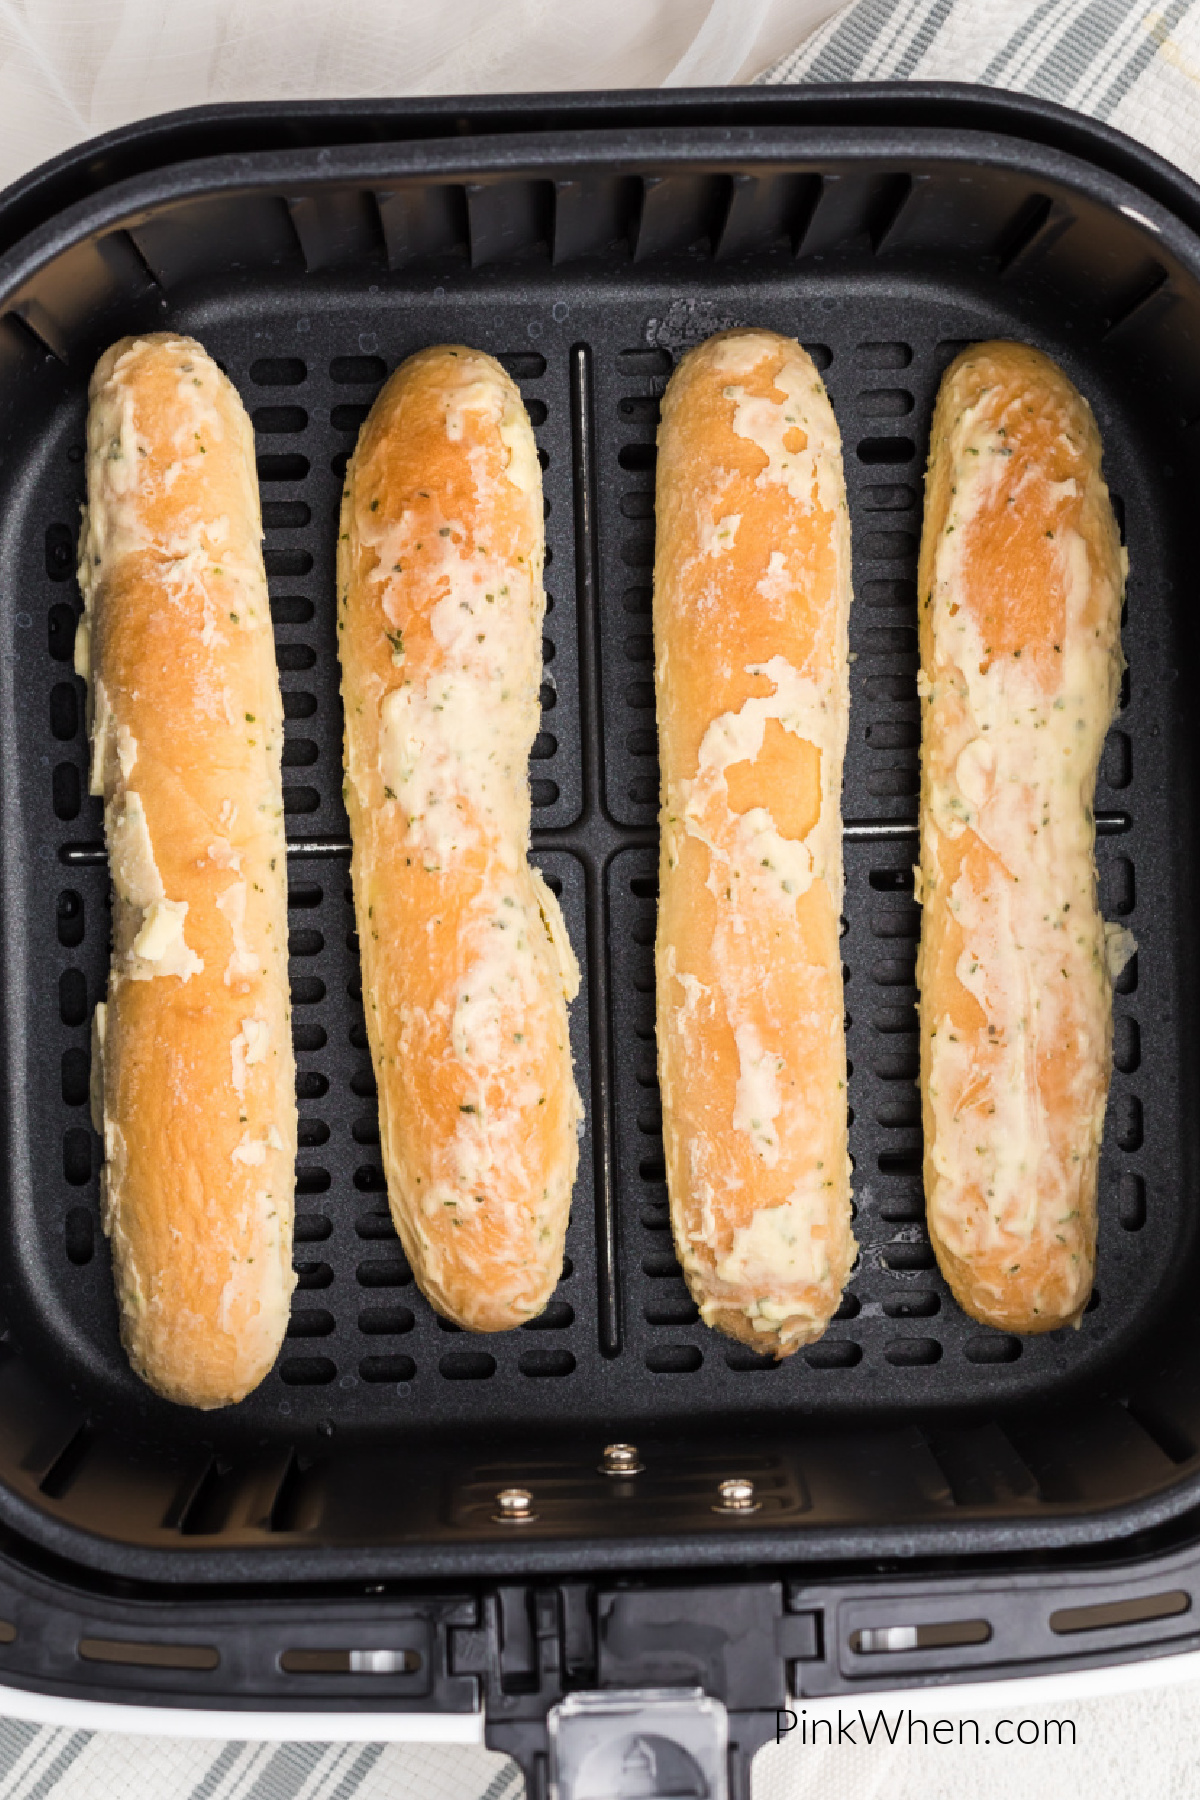 Frozen breadsticks in a single layer in the basket of the air fryer.